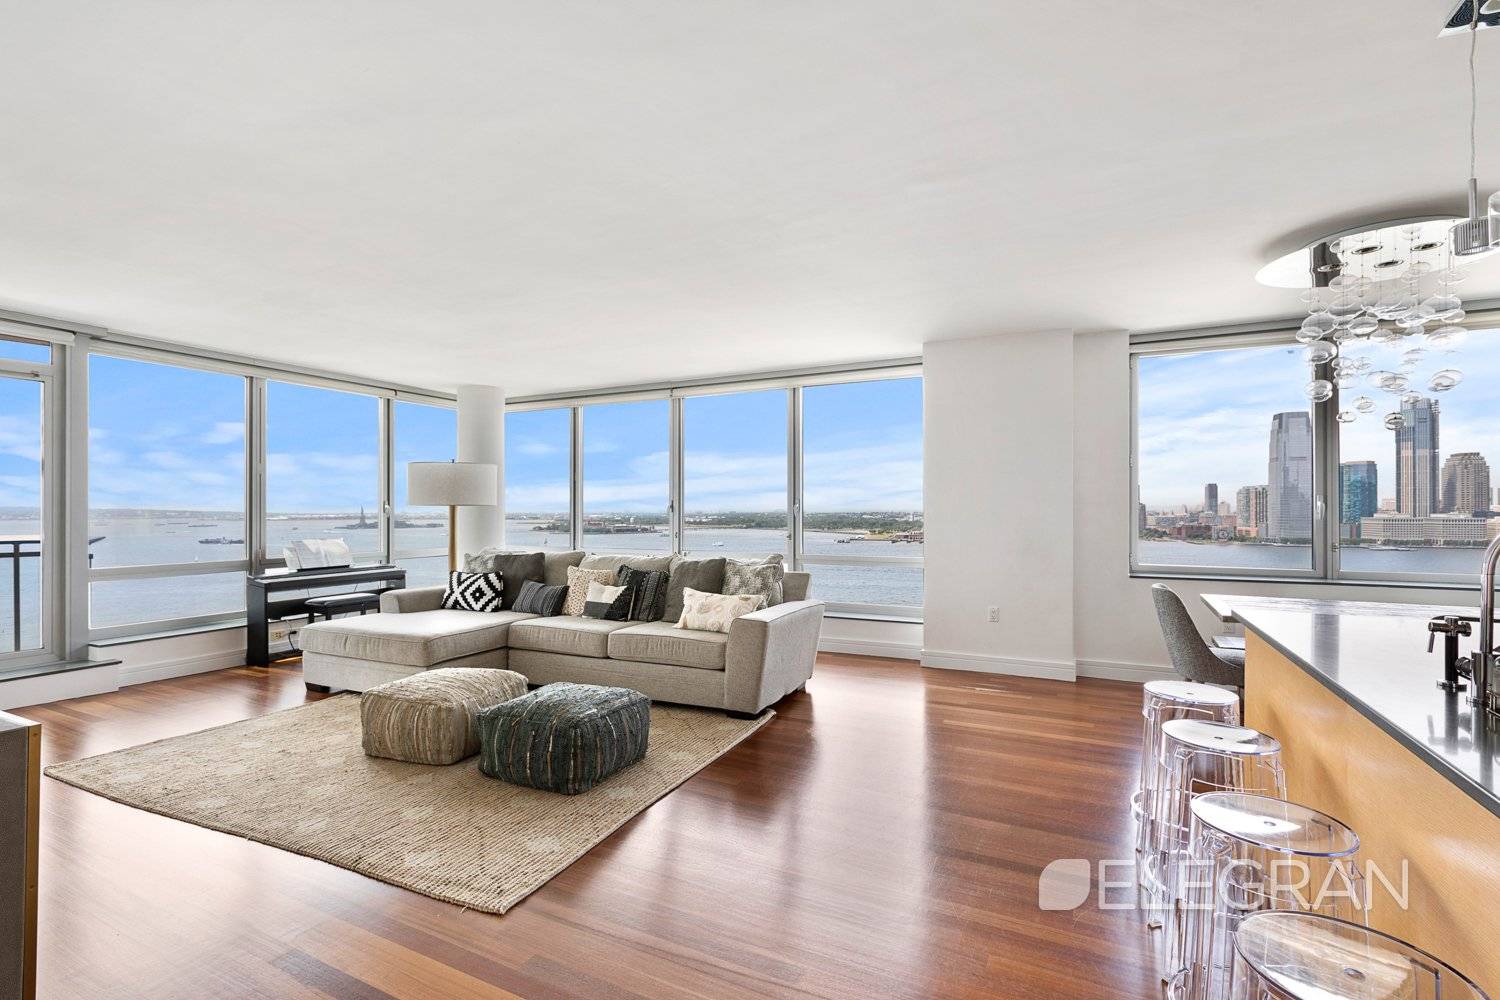 Fantastic opportunity to live in a gorgeous, expansive 2, 097sf high floor apartment in the fabulous Millennium Tower.